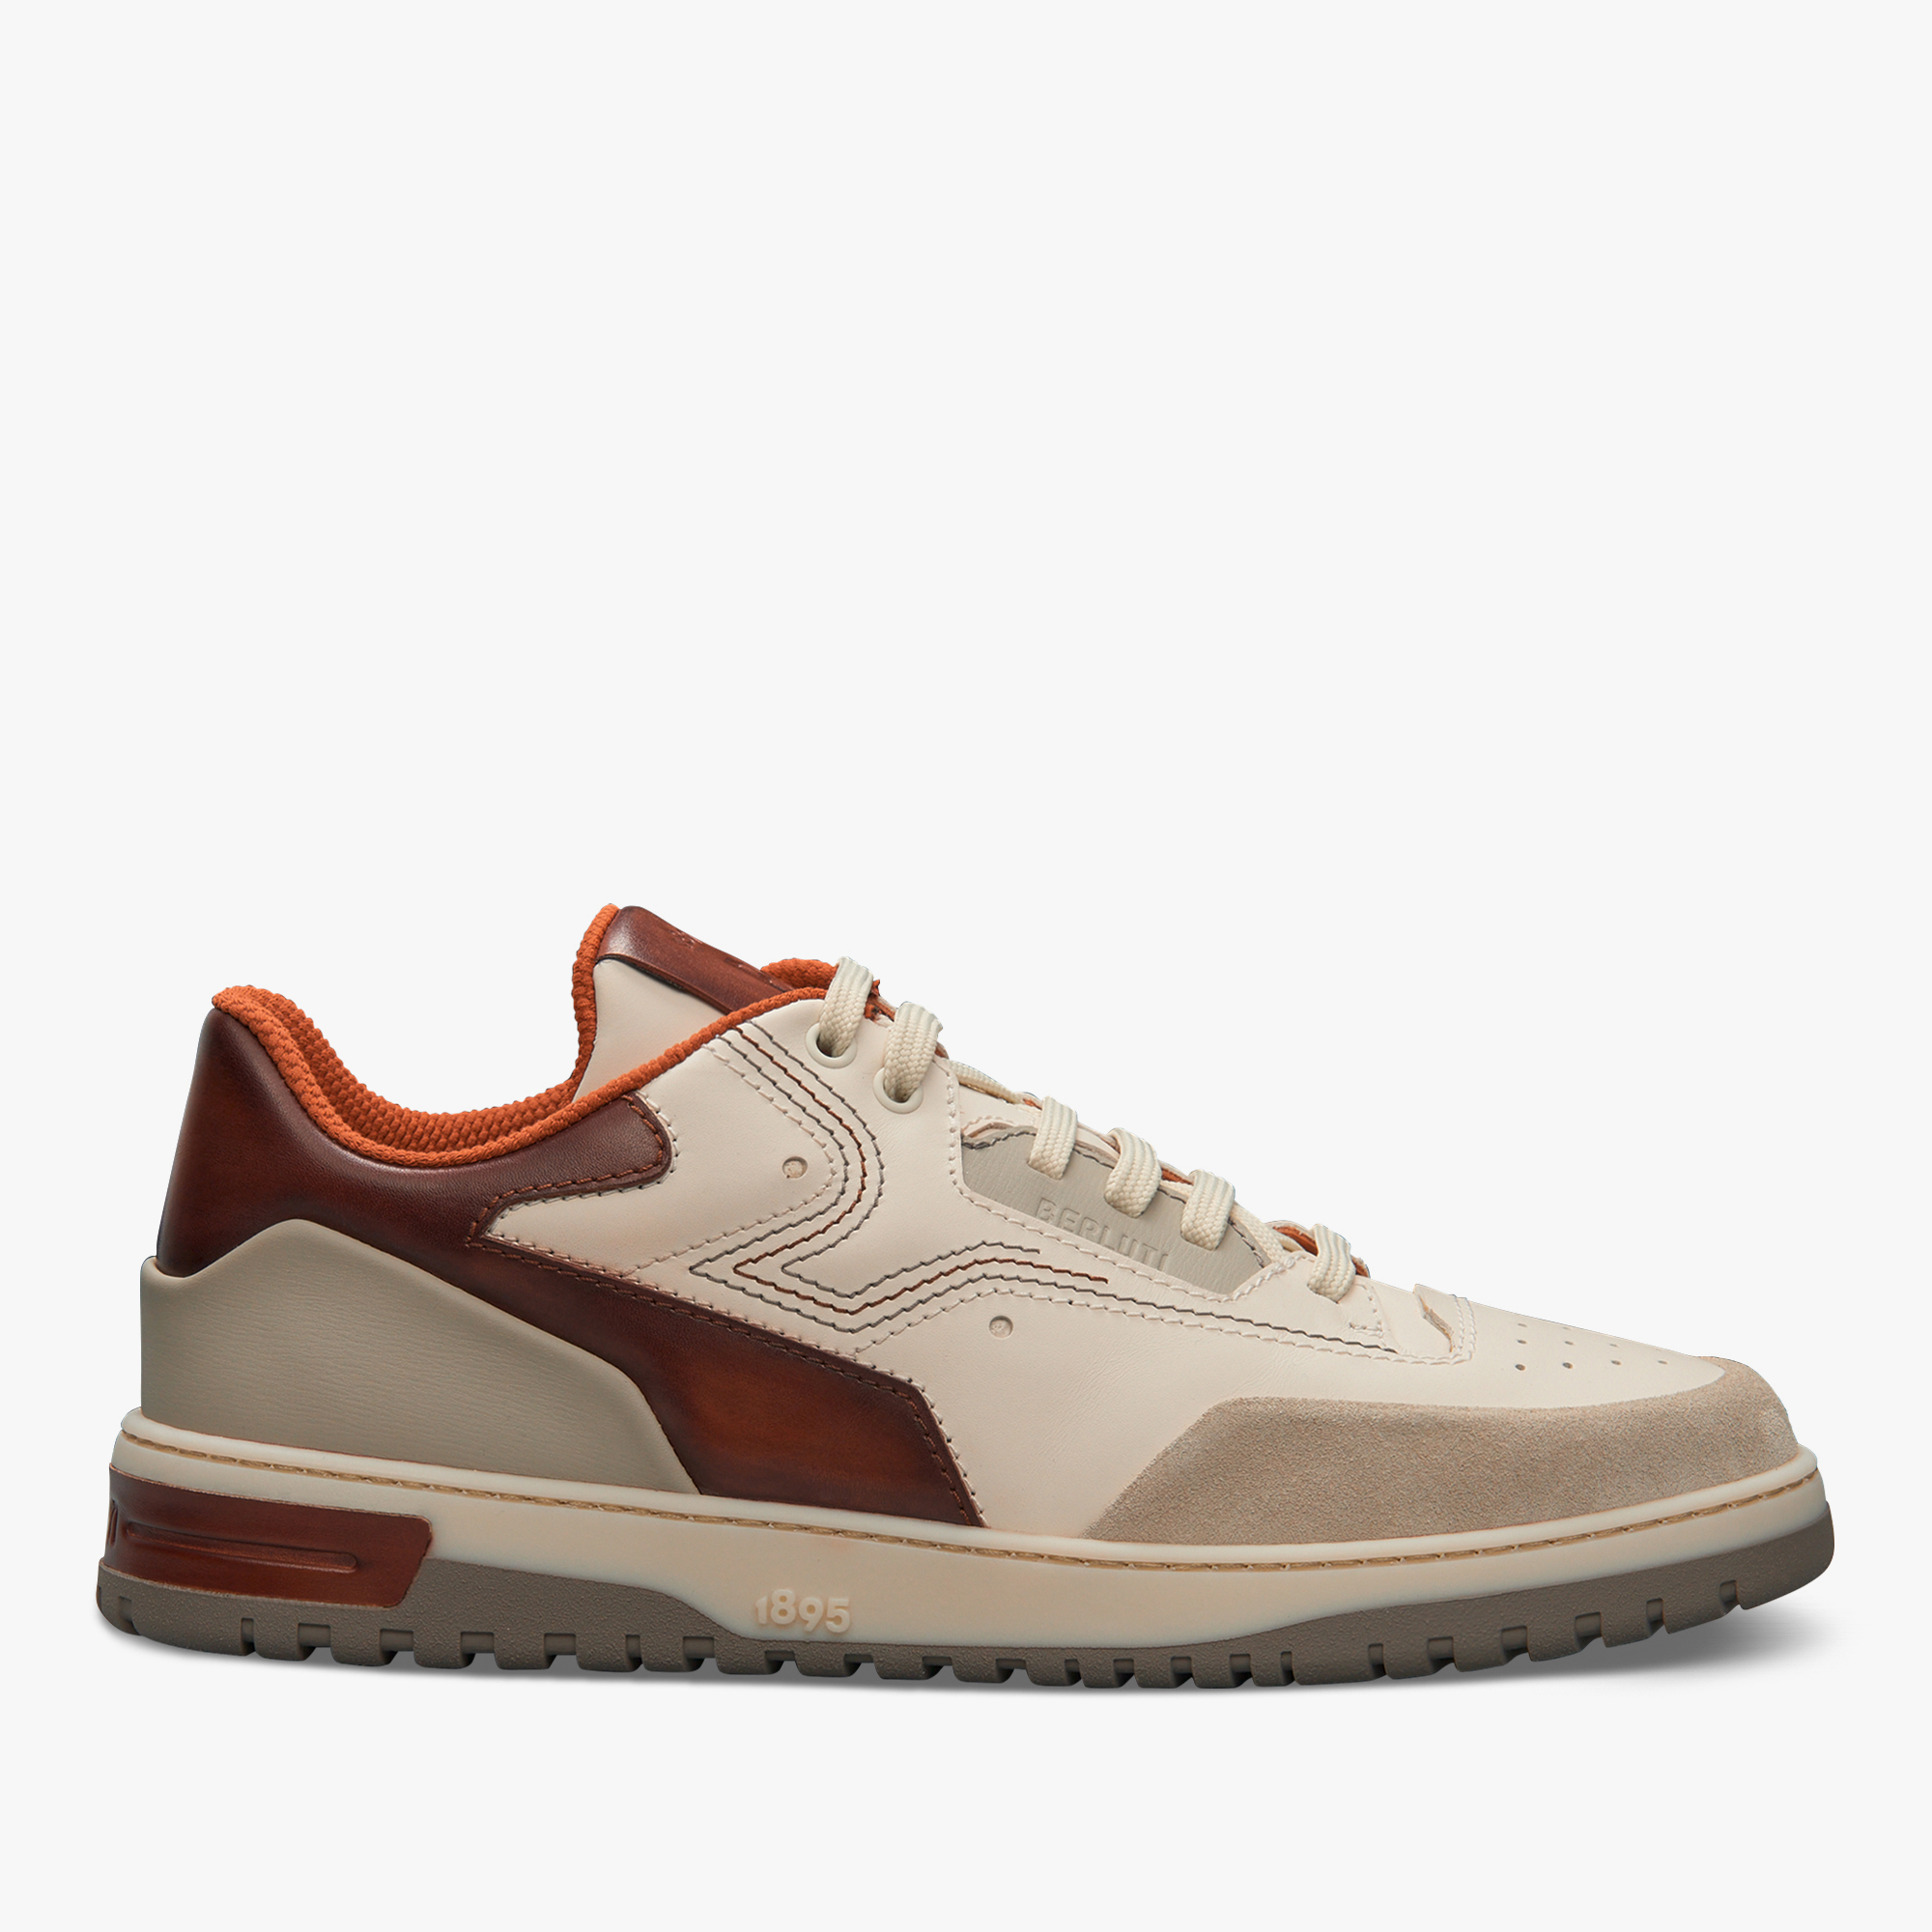 Playoff Leather Sneaker, OFF WHITE & CACAO INTENSO, hi-res